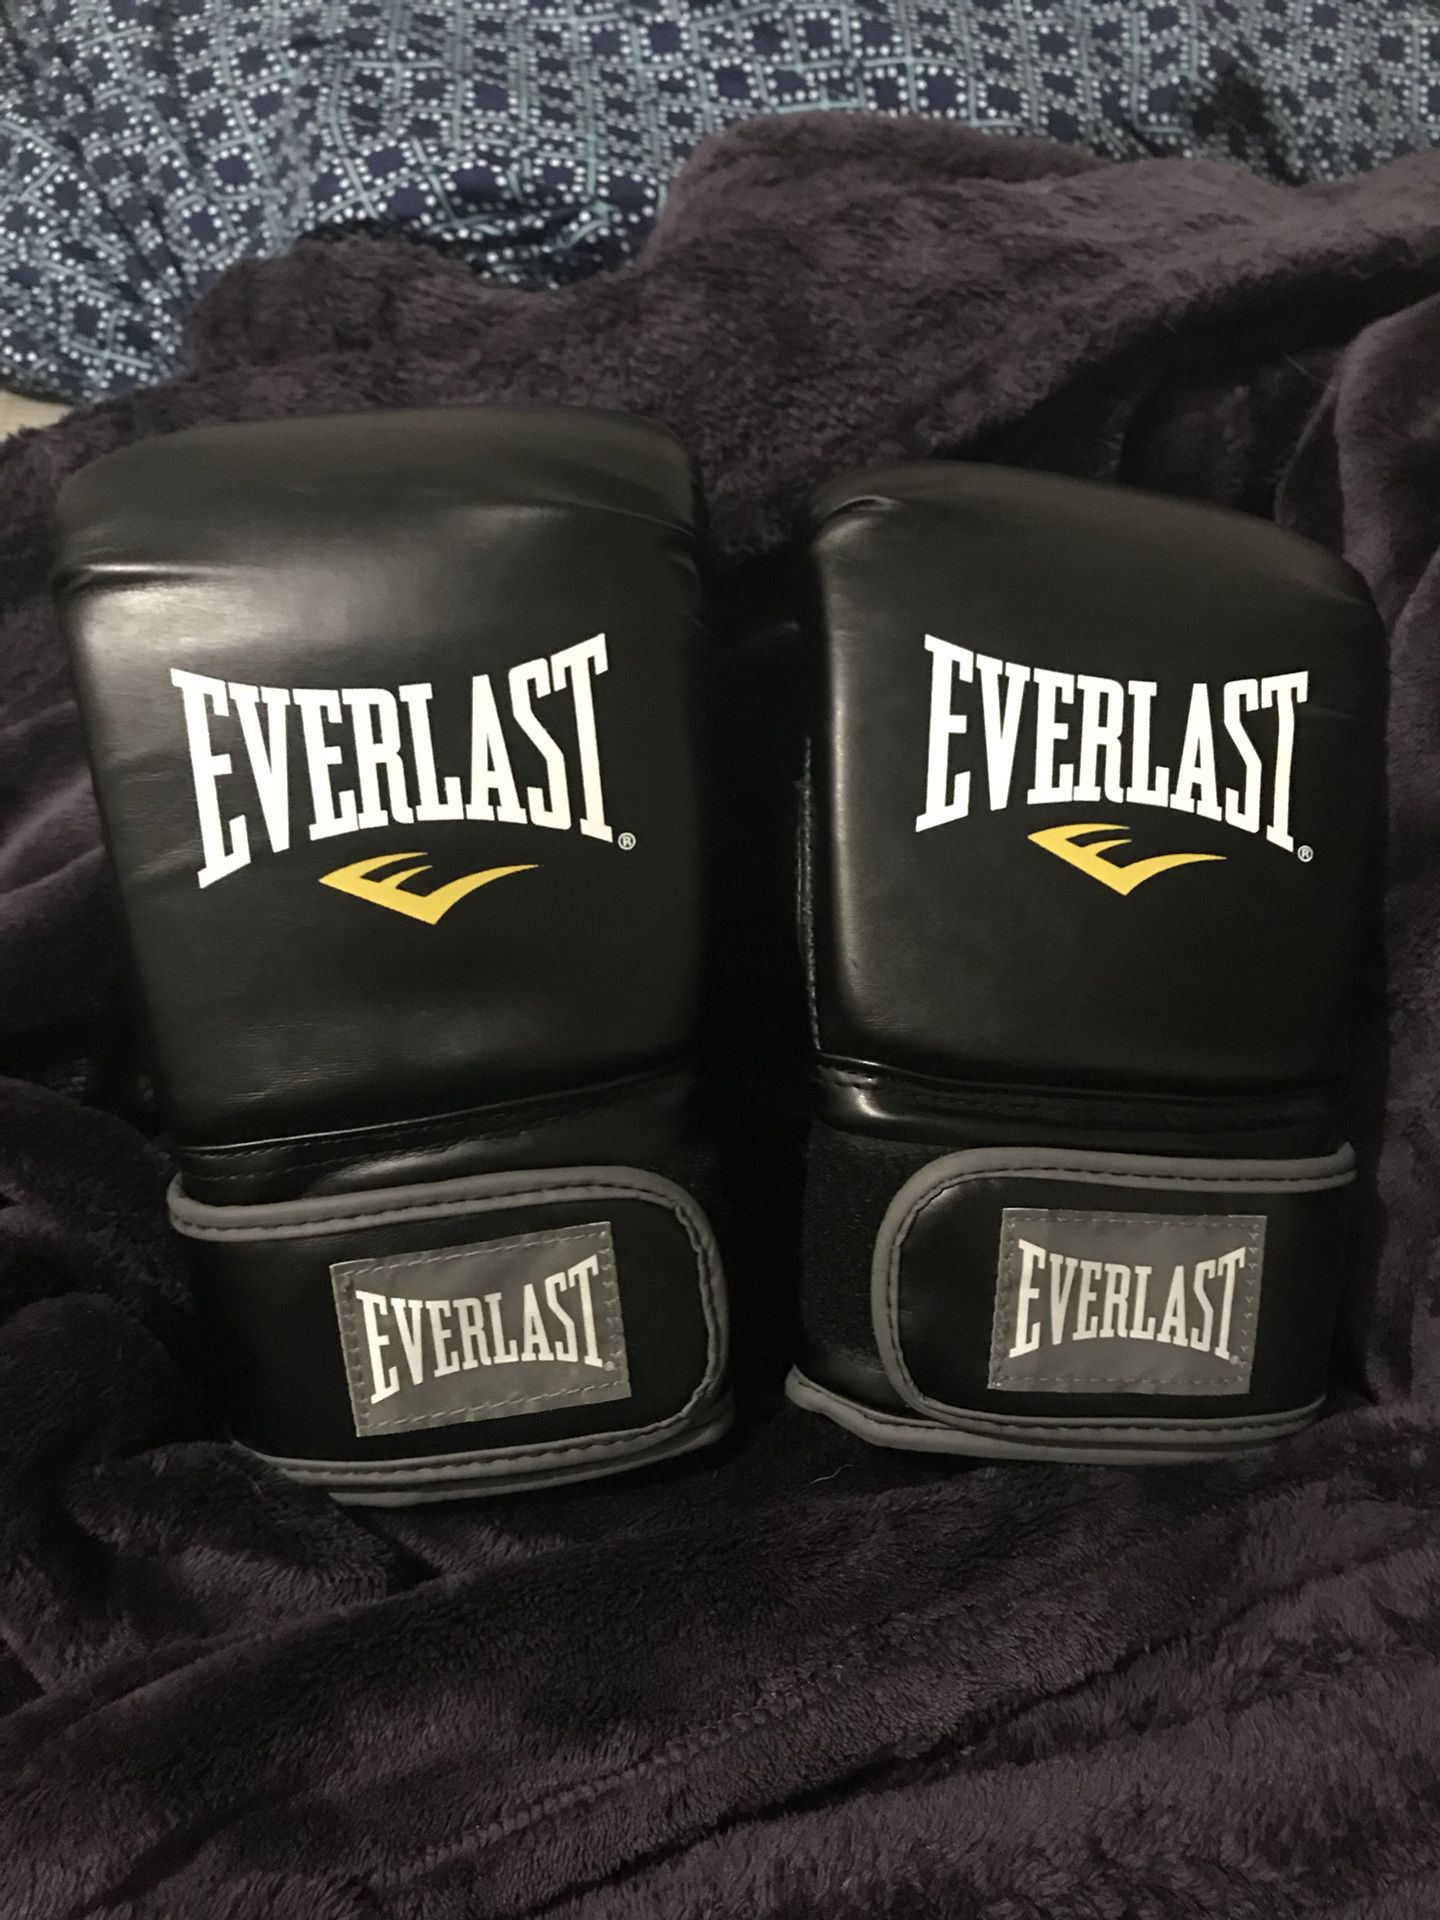 Boxing gloves and hand wraps